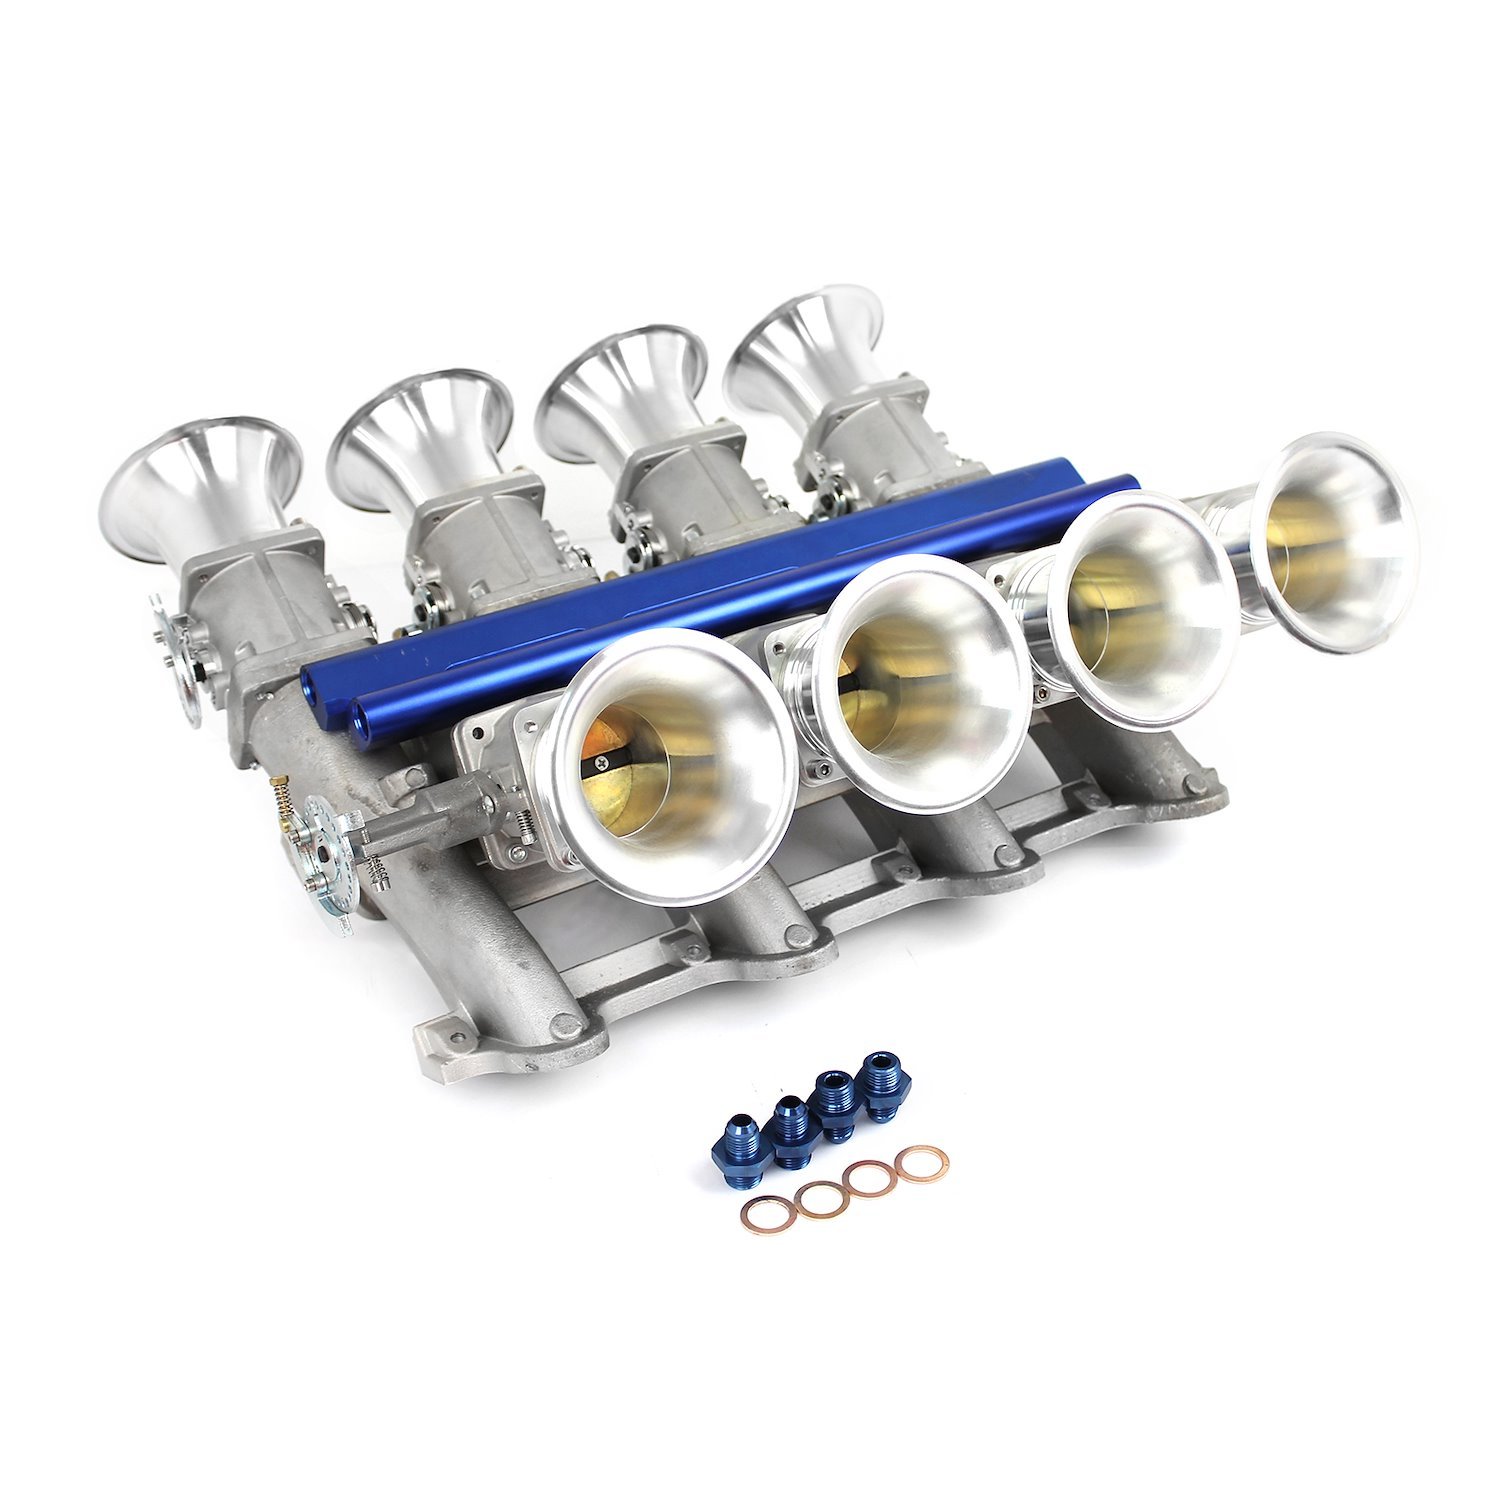 PCE148.1055 Chevy LS7 Side Draft EFI Stack Intake Manifold System Complete [Satin]